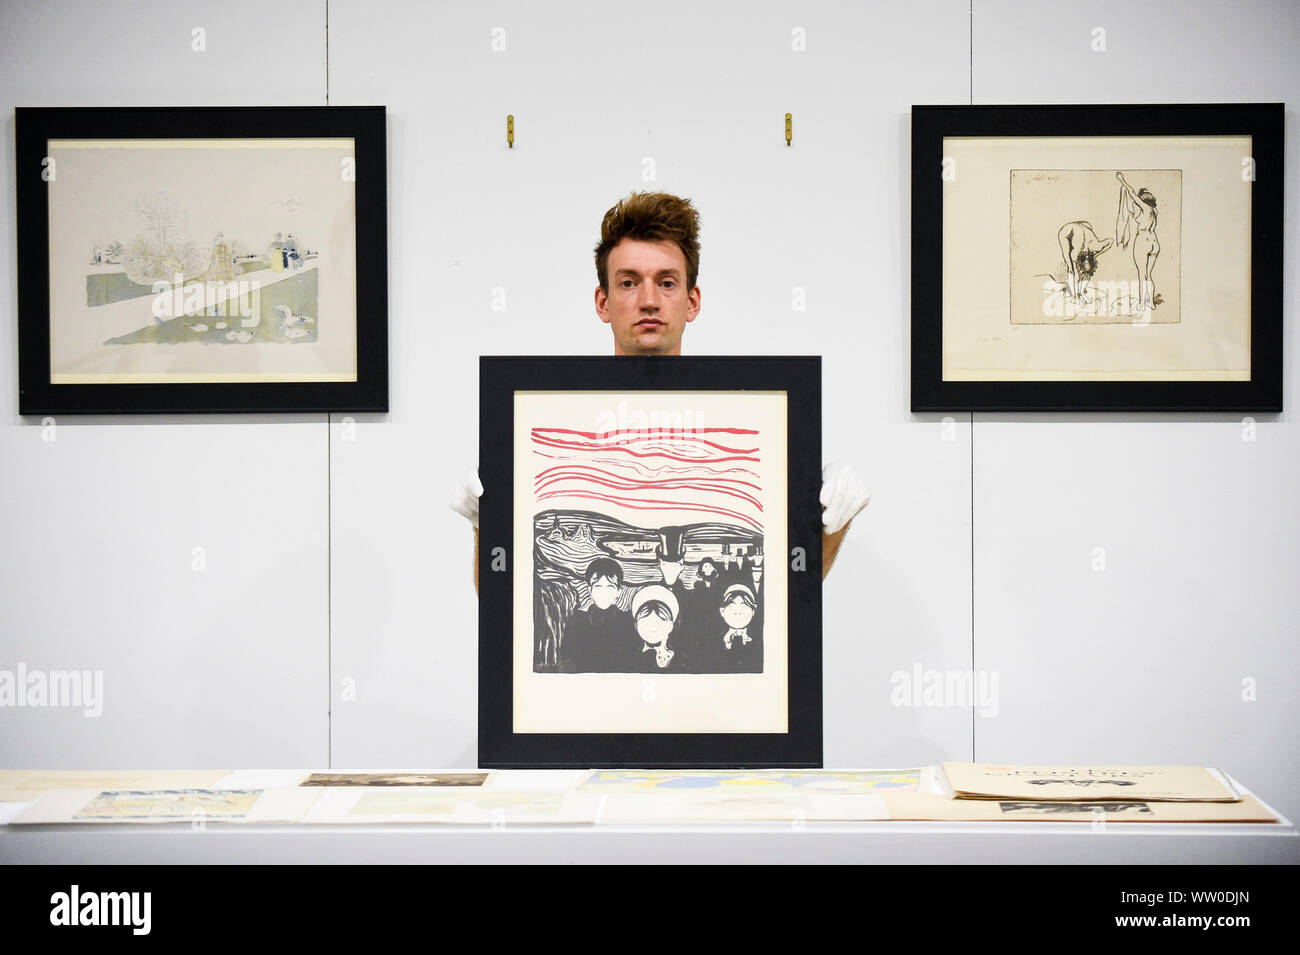 London, UK.  12 September 2019.  A technician presents a lithograph 'Le Soir' (Angst) by Edvard Munch at a photocall for 'Les Peintres-Graveurs', a multi-artist portfolio of lithographs published in 1896 by Ambroise Vollard, to be auctioned at Sotheby's on September 17 with an estimate of £500,000 to £1,000,000.  It is the only known complete example and includes 22 prints by the greatest Impressionist and Post-Impressionist artists., as well as the first colour lithograph by, a then not so well-known, Edvard Munch. Credit: Stephen Chung / Alamy Live News Stock Photo